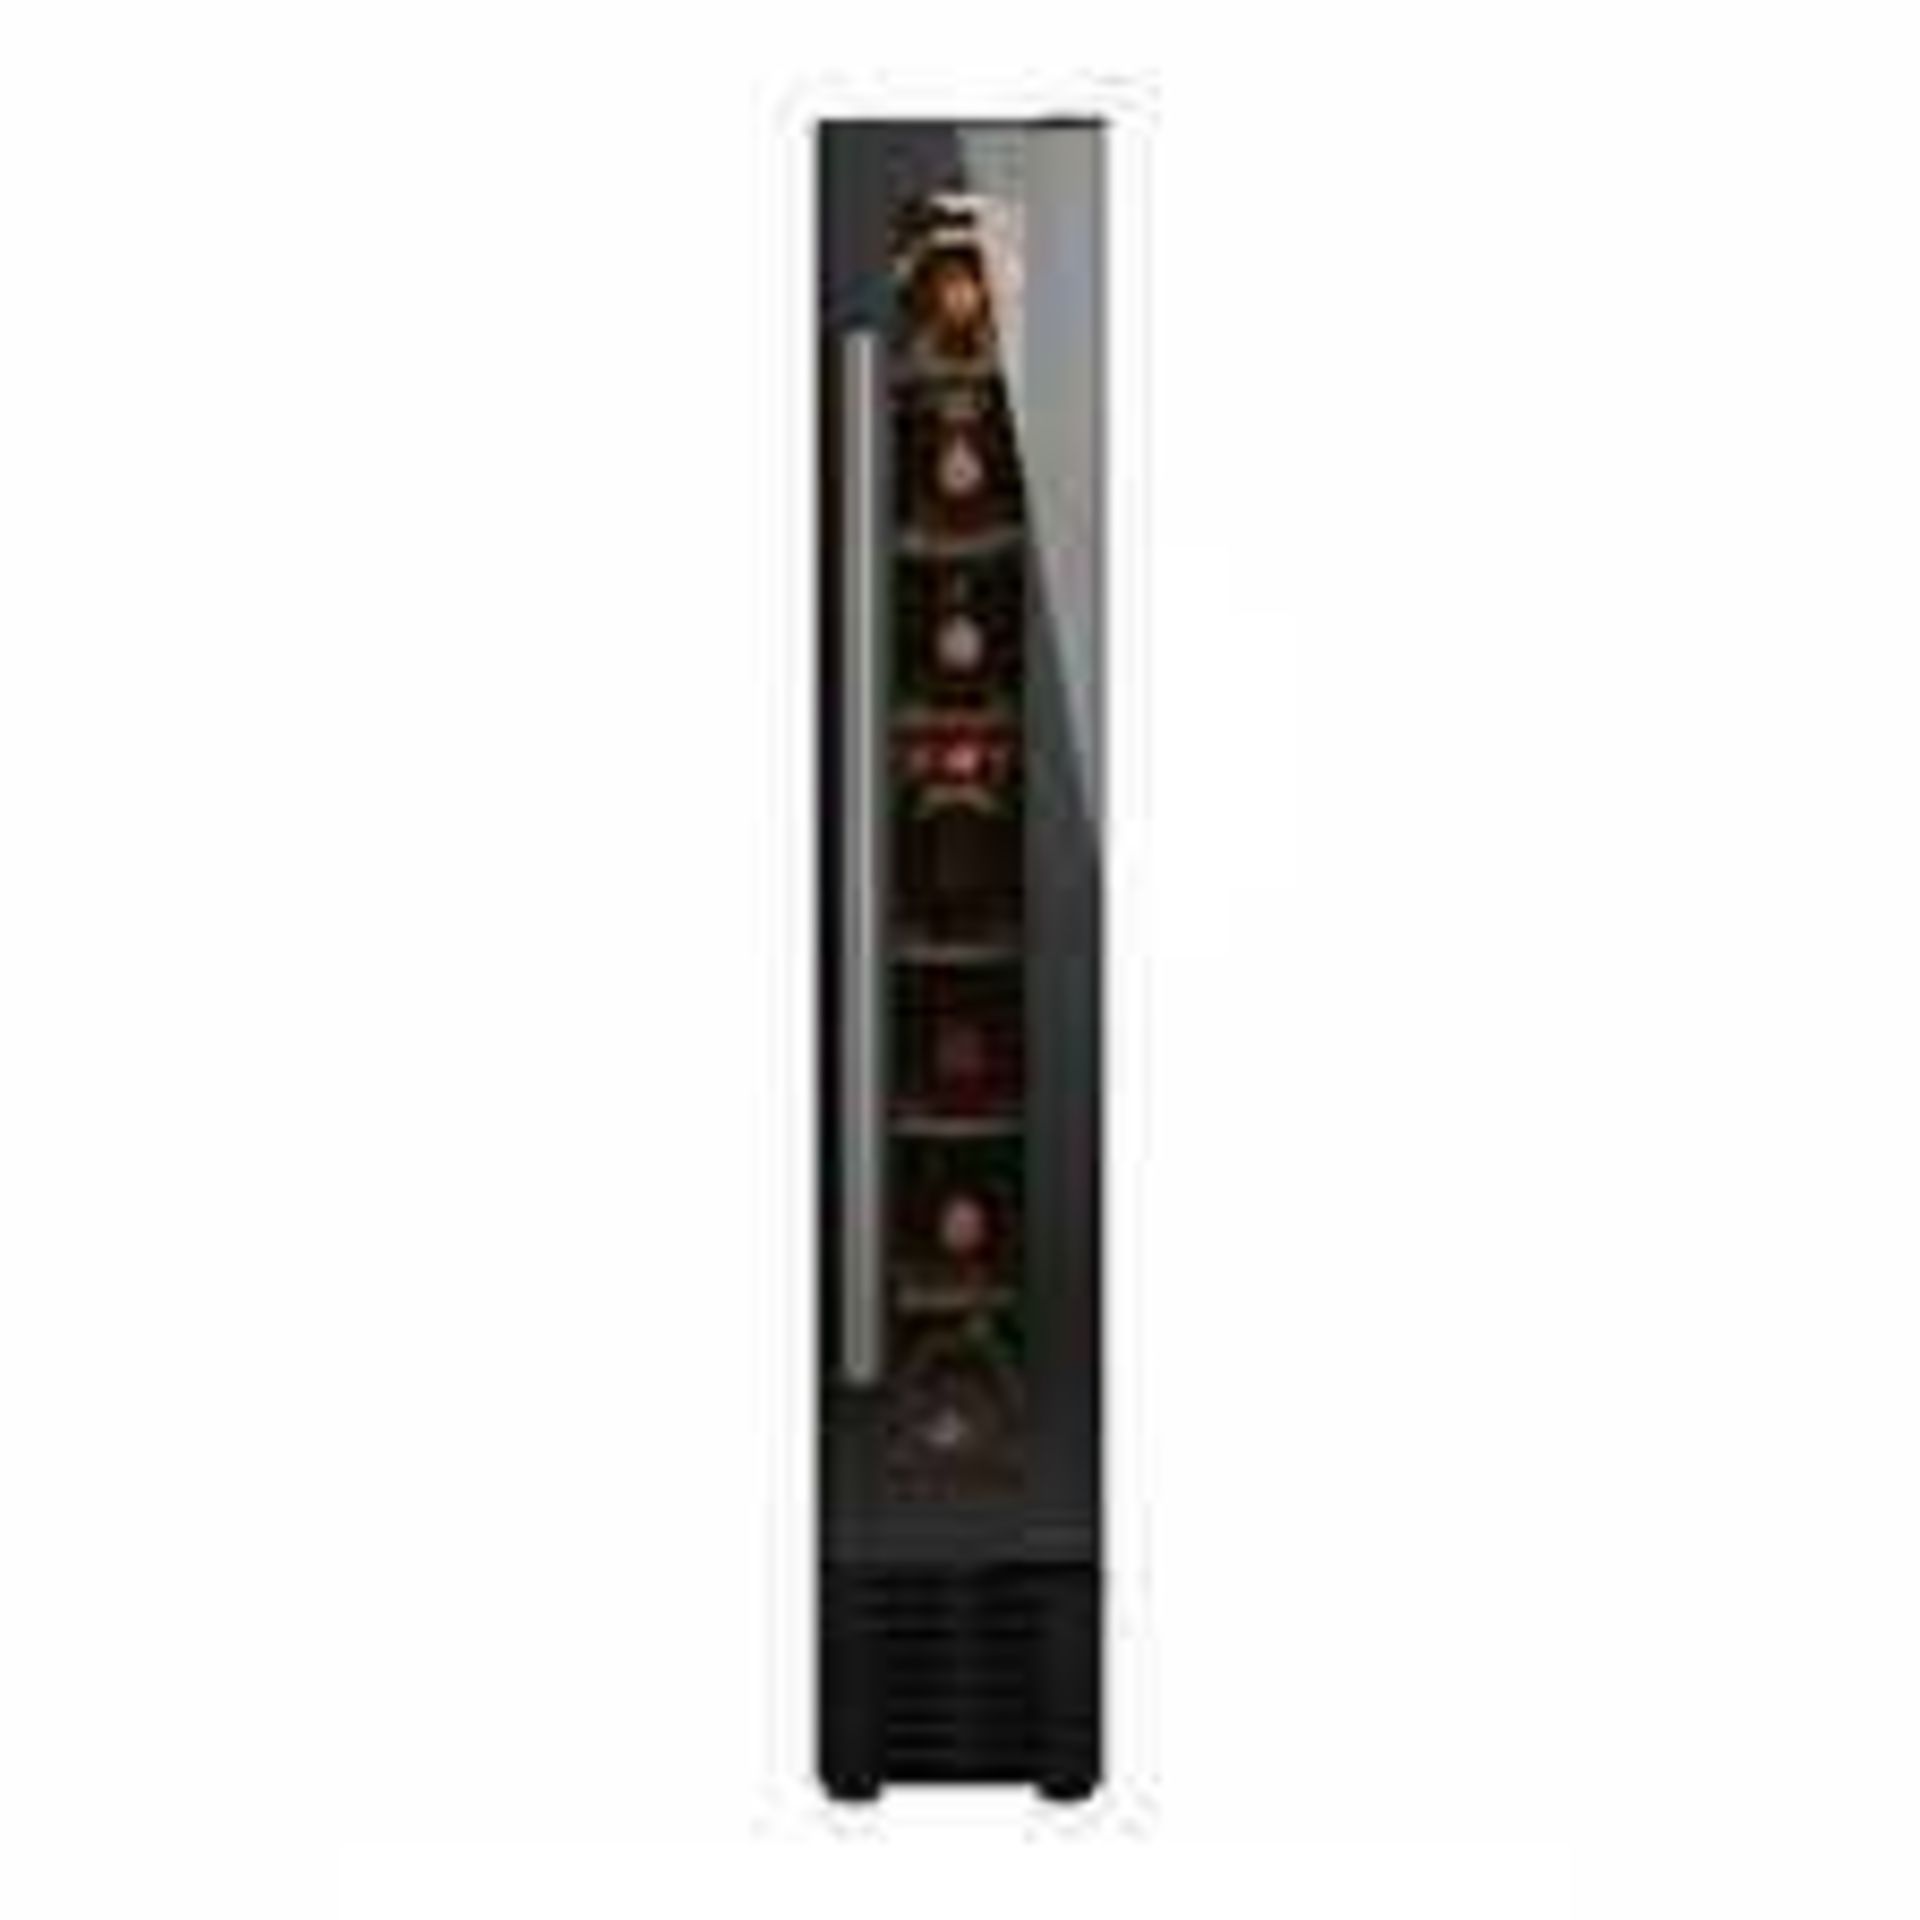 RRP £330 Viceroy Wrcw15Bked Wine Cooler